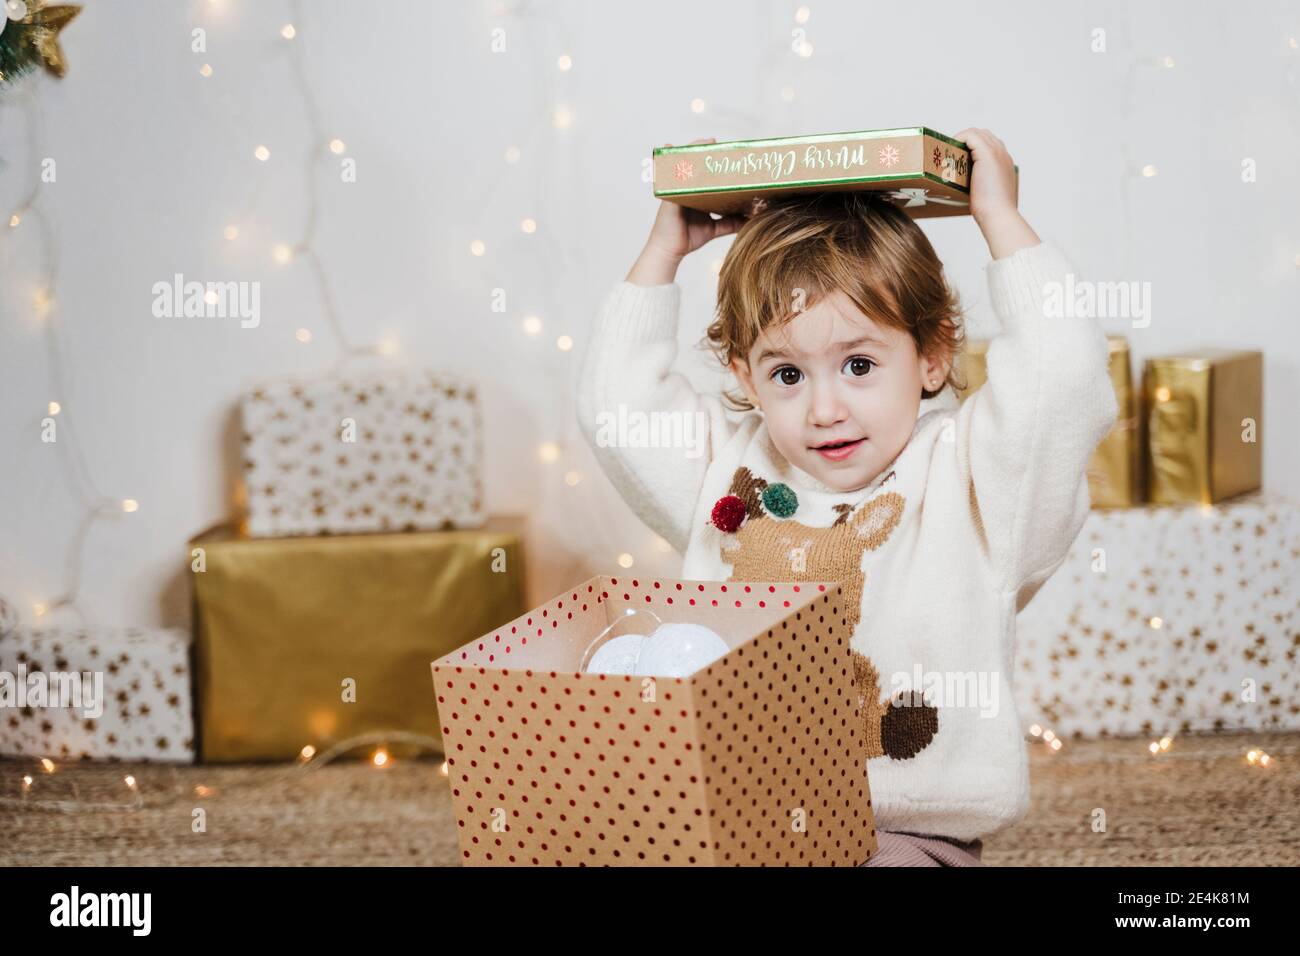 Cute baby girl opening Christmas present while sitting at home Stock Photo